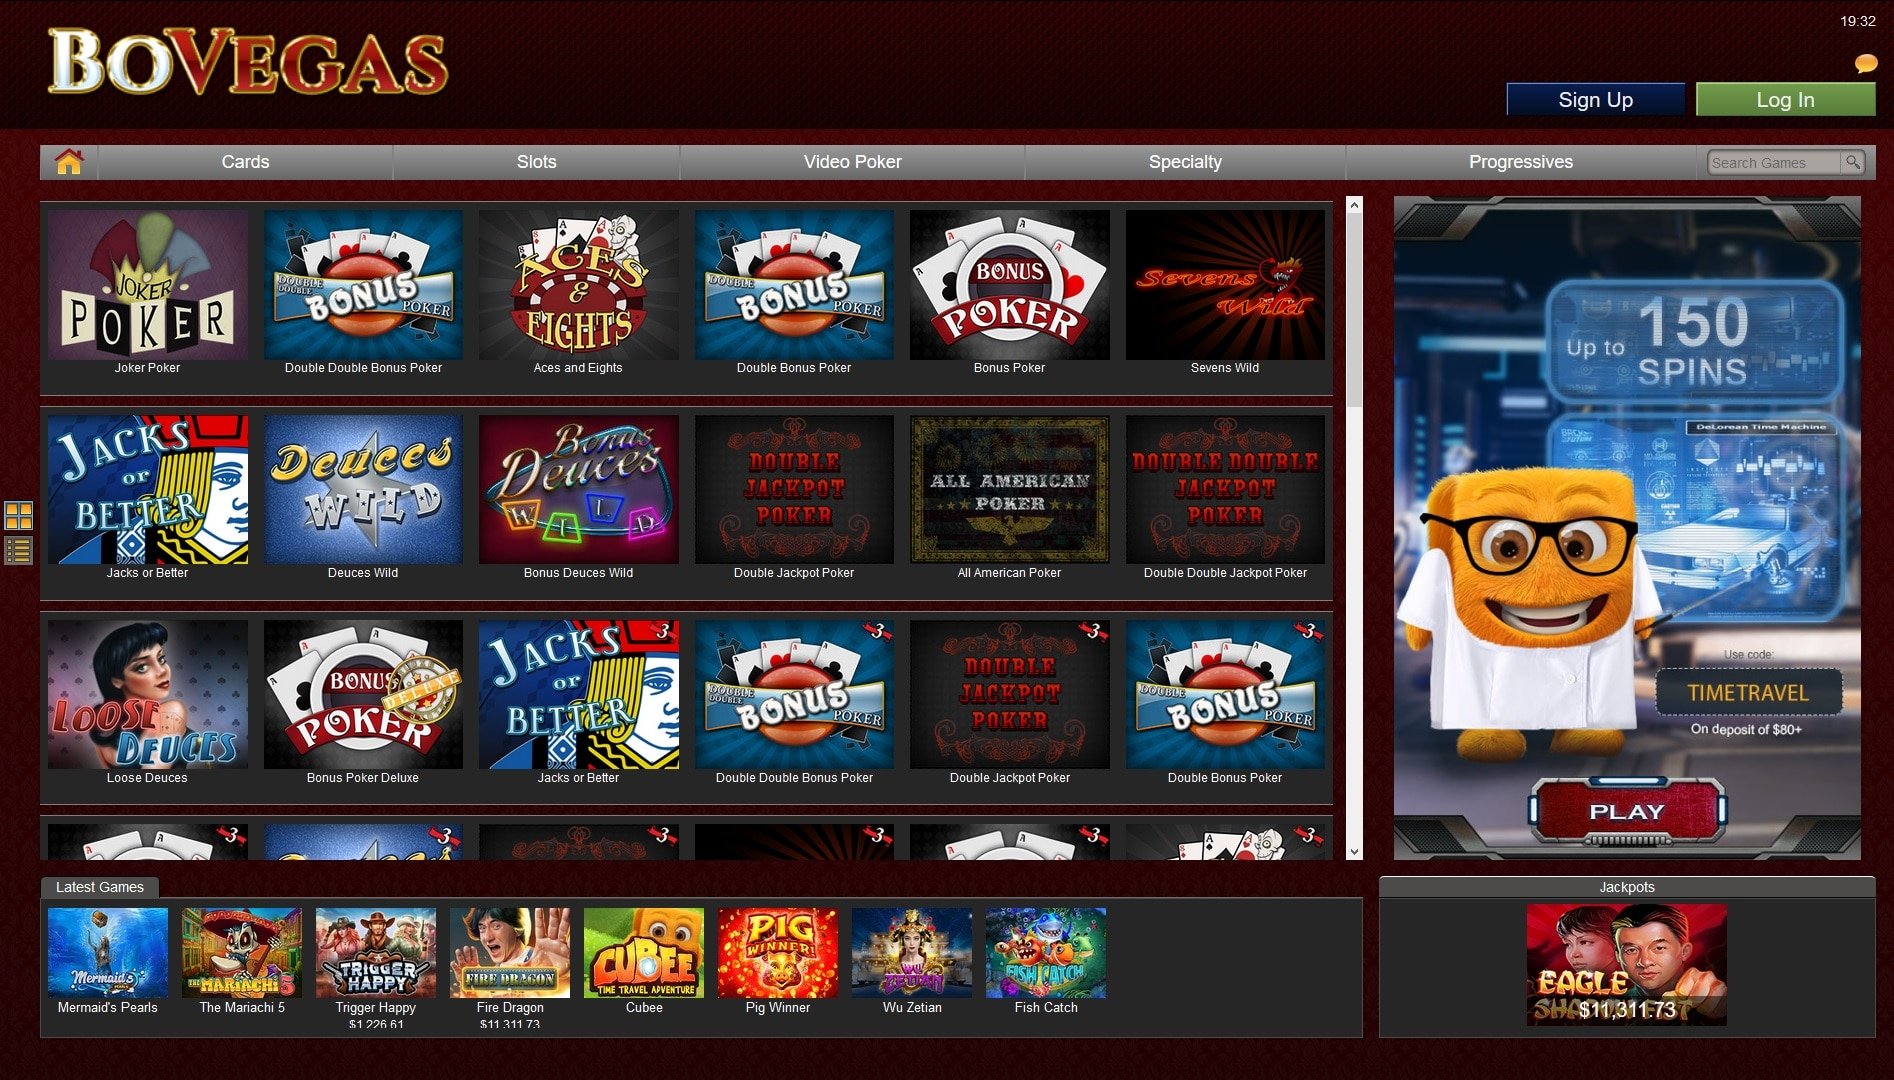 Bovegas Free Spins